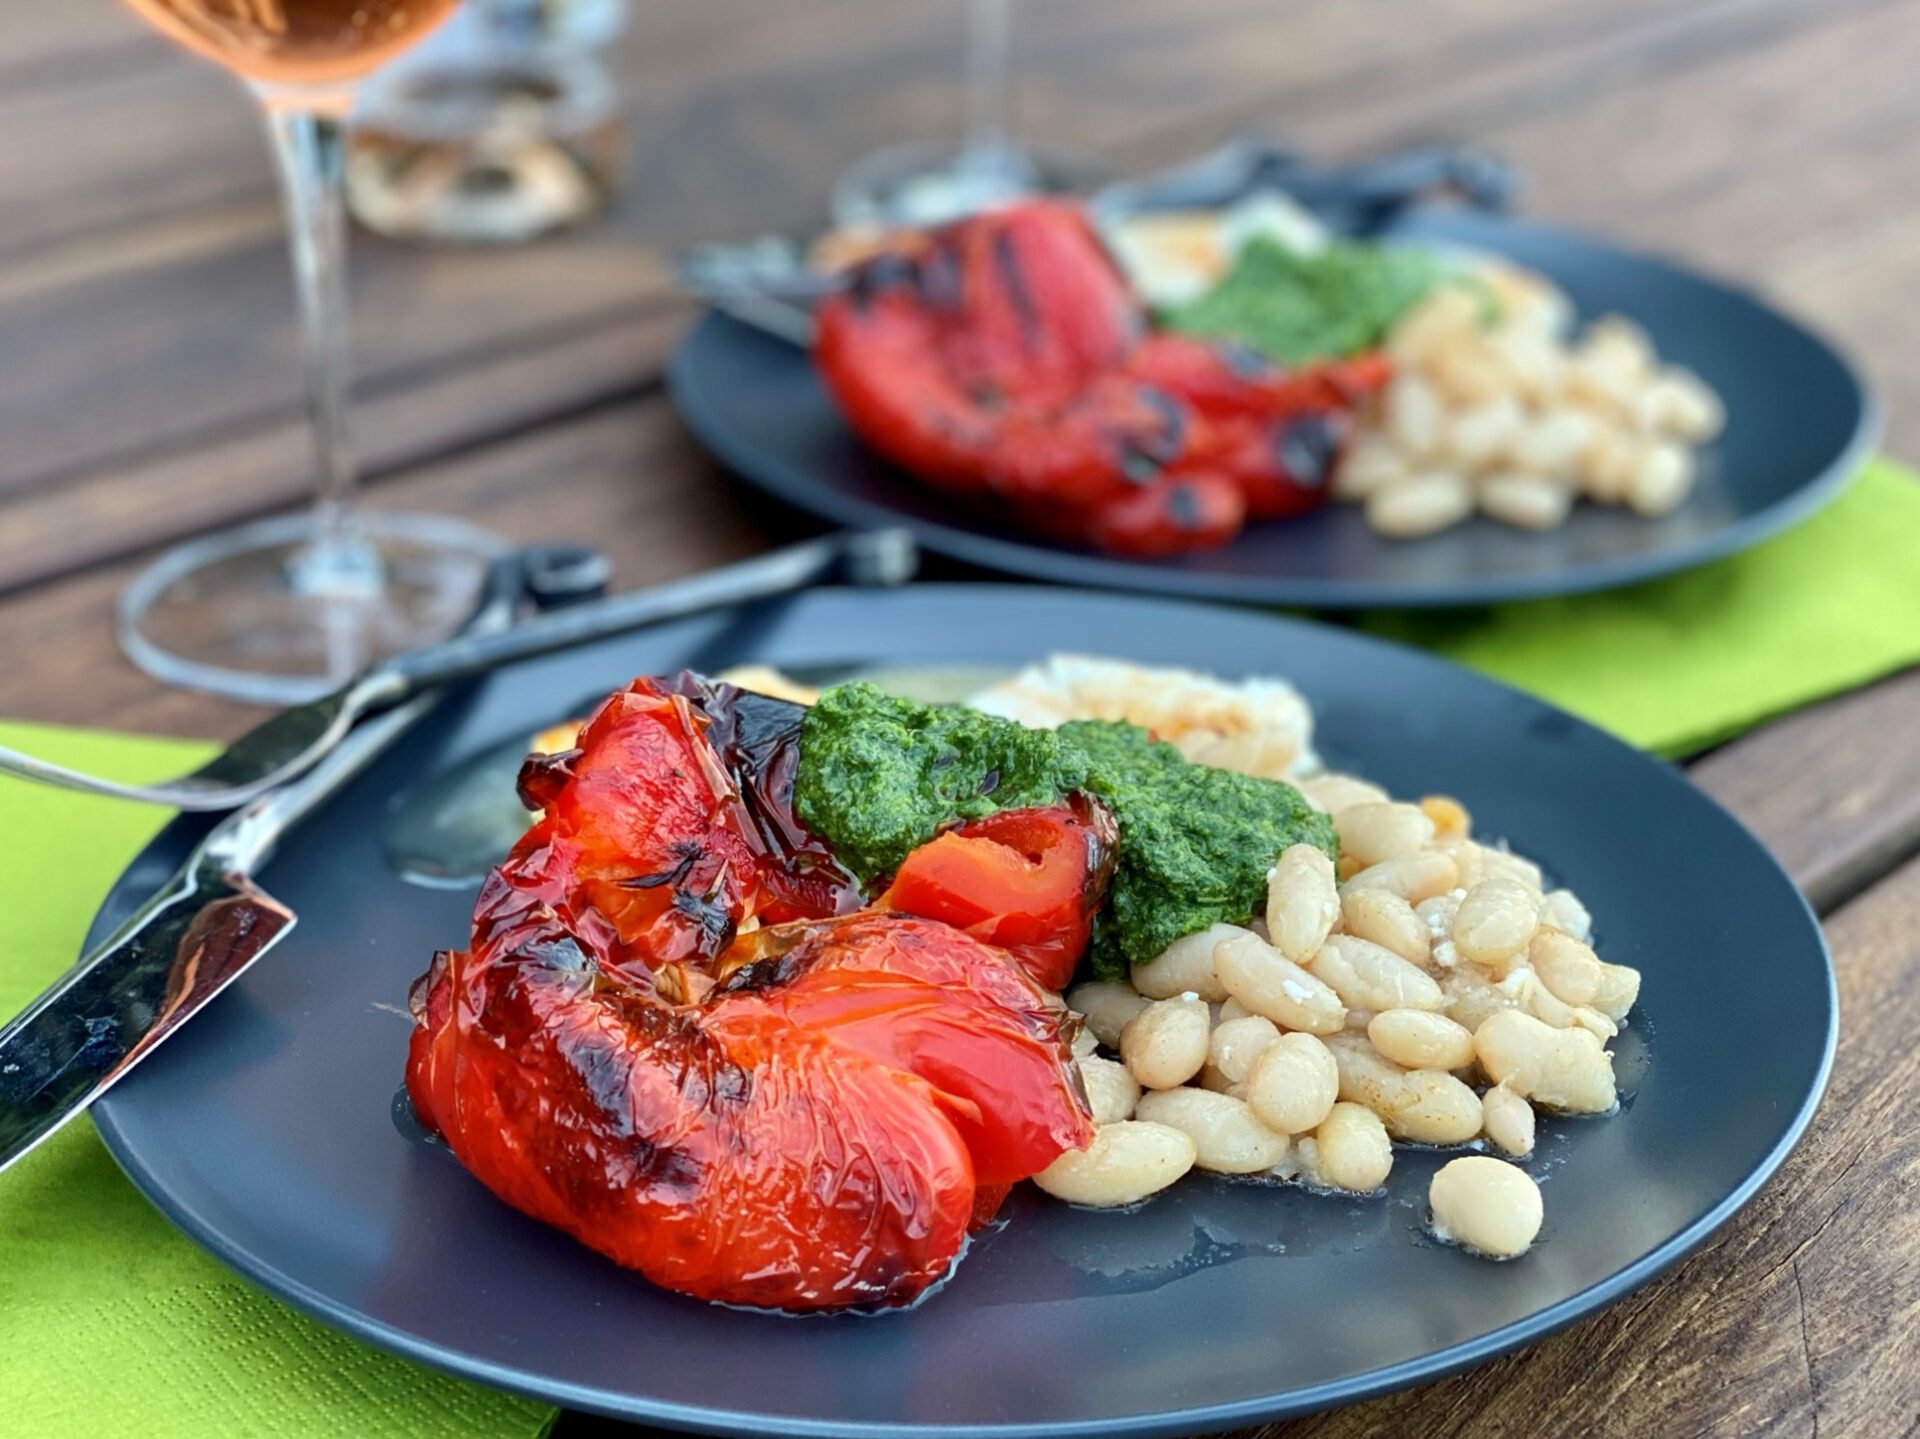 Plates of roasted red peppers, white beans, feta, and green herb sauce.